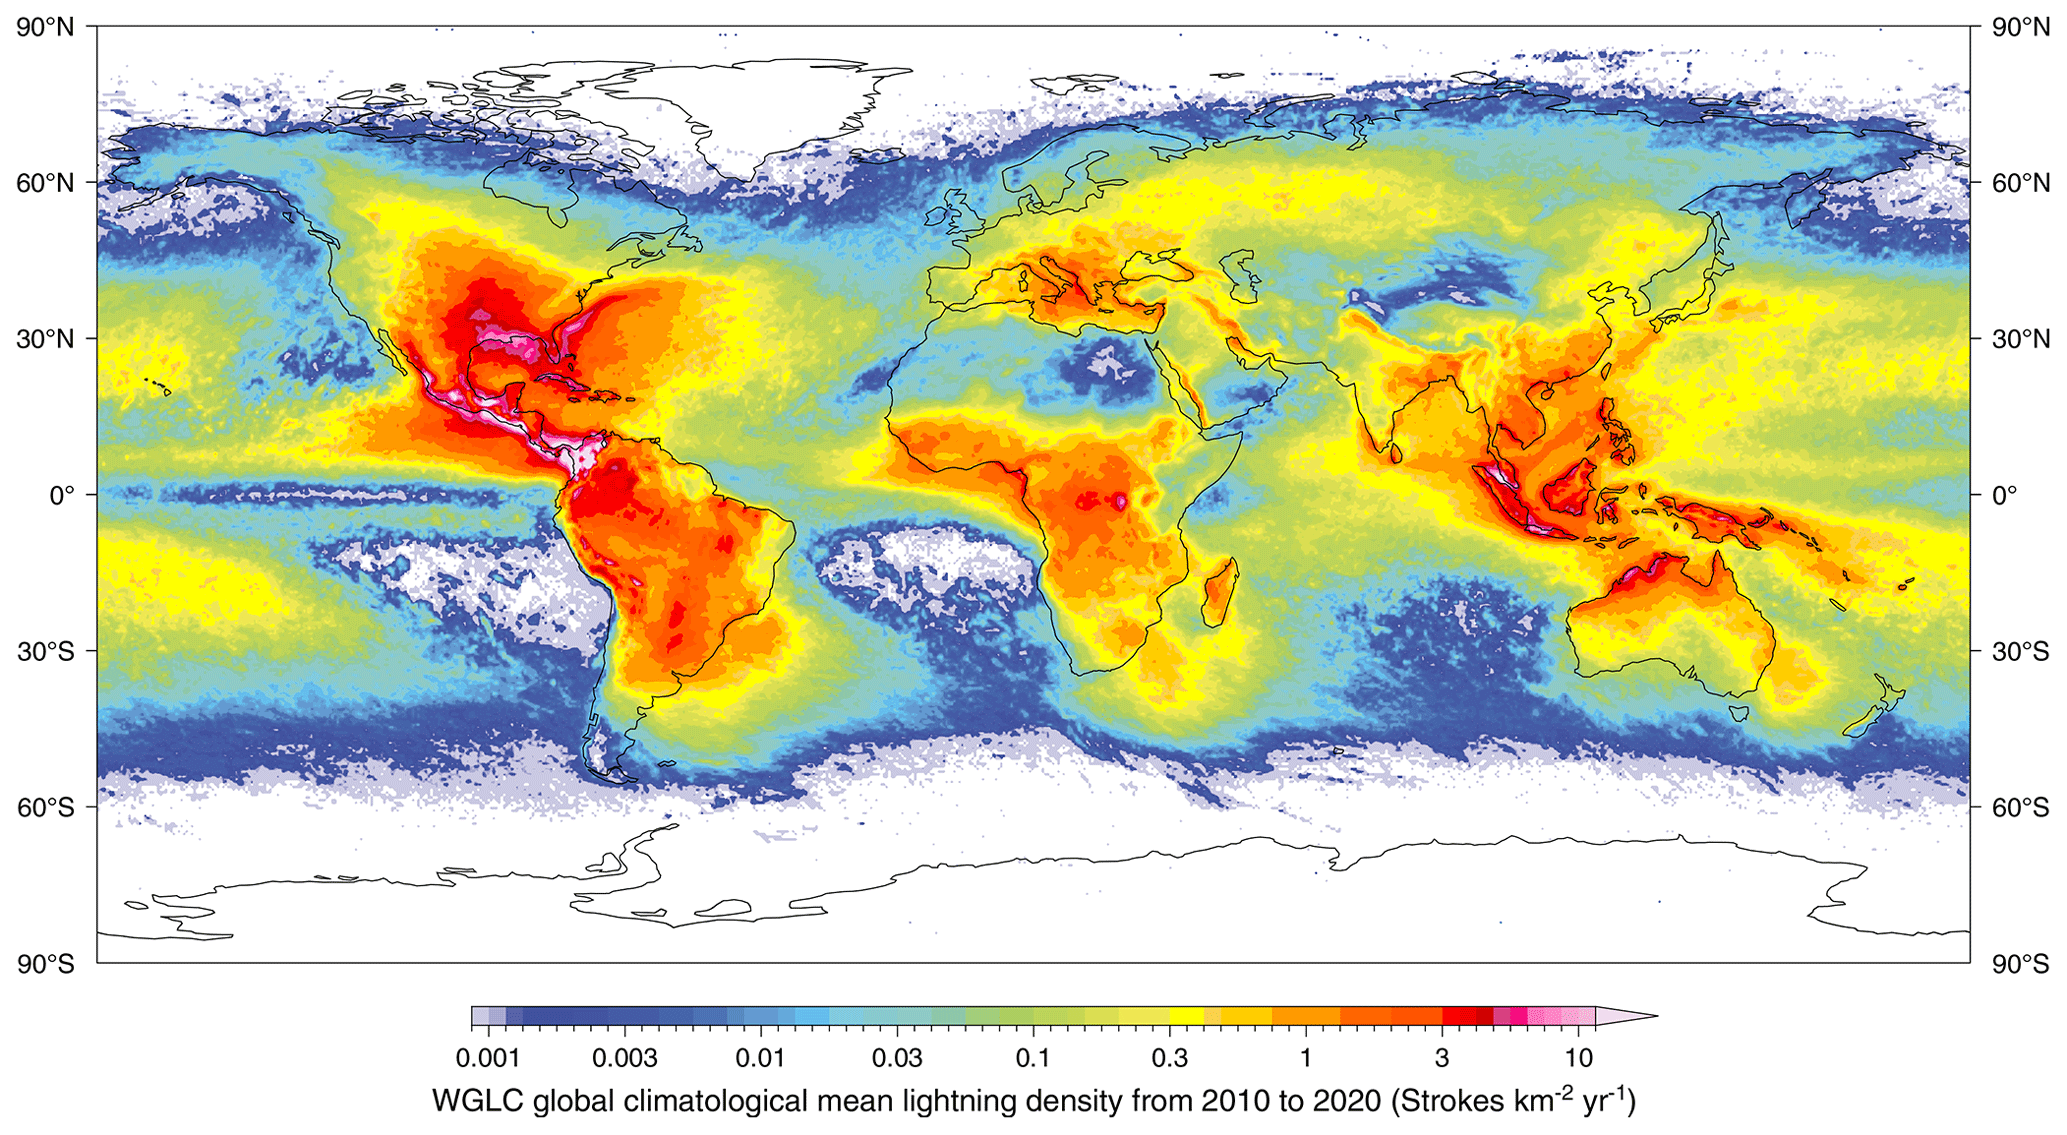 ESSD - The WGLC global gridded lightning climatology and time series